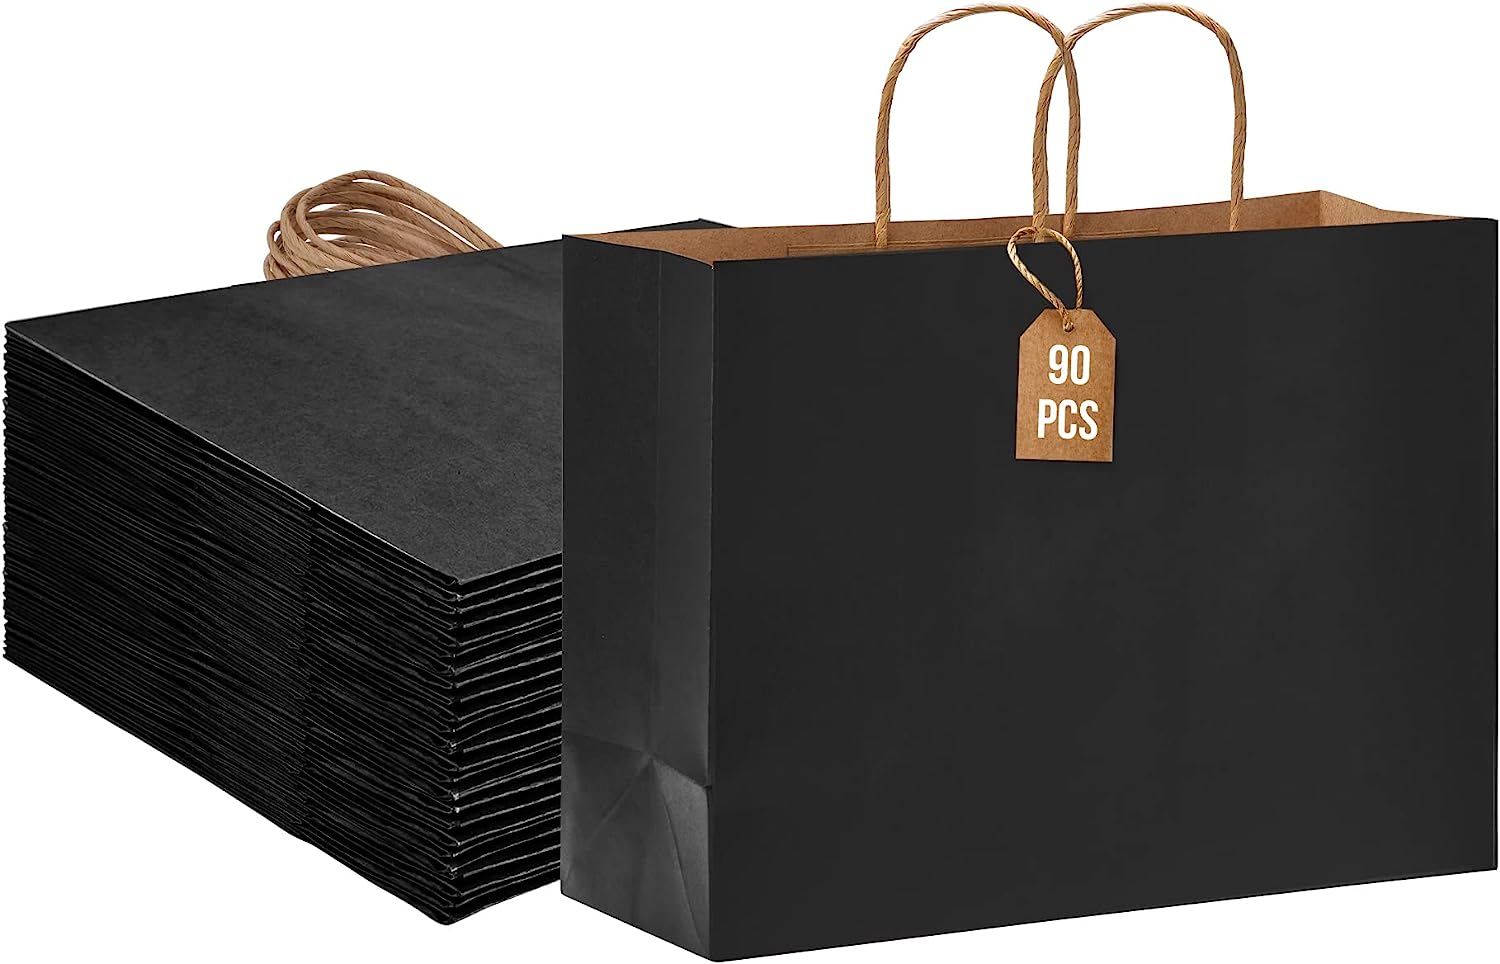 PRB Presents Craft Paper Bags | Grocery Shopping Bags | Gift Bags, Pack of  30 pcs Bag Size H-9*L-7*B-3 inch